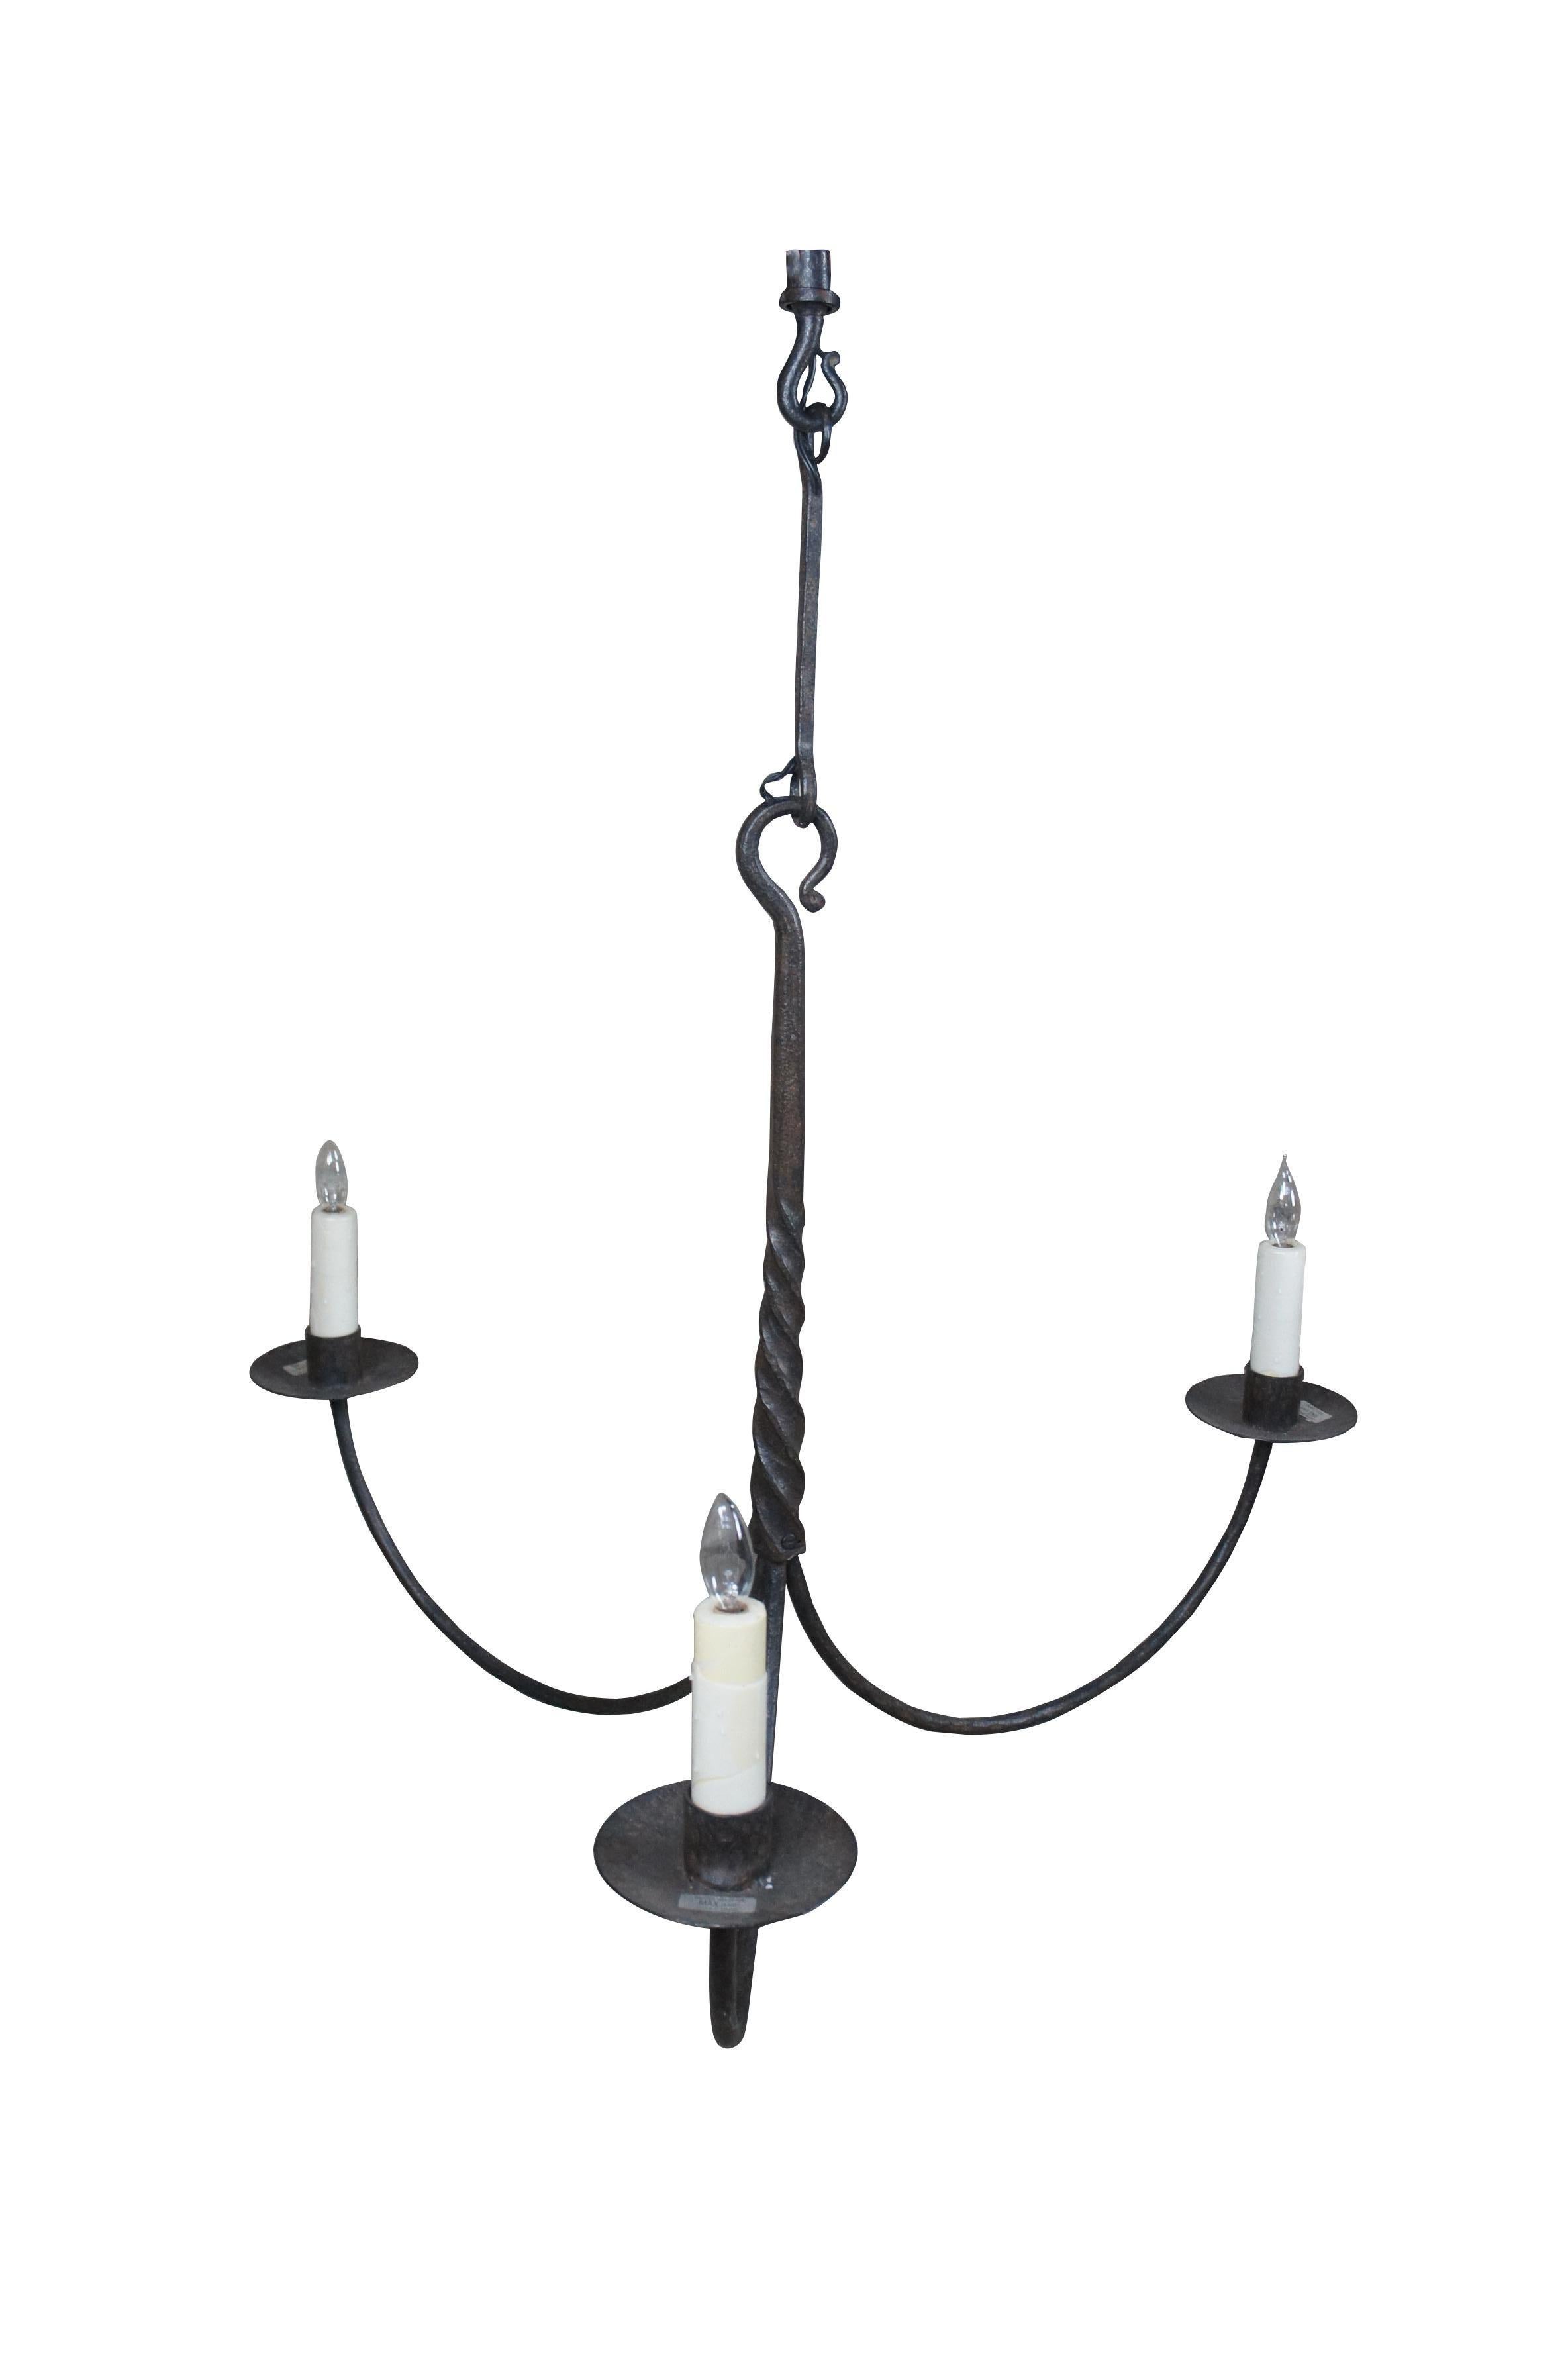 Paul Ferrante old iron forged wrought iron chandelier.  Features primitive old world styling with twisted center and down swept arms leading to three lights with wax drip pans and candle covers.

Paul Ferrante is a family-owned and operated company,